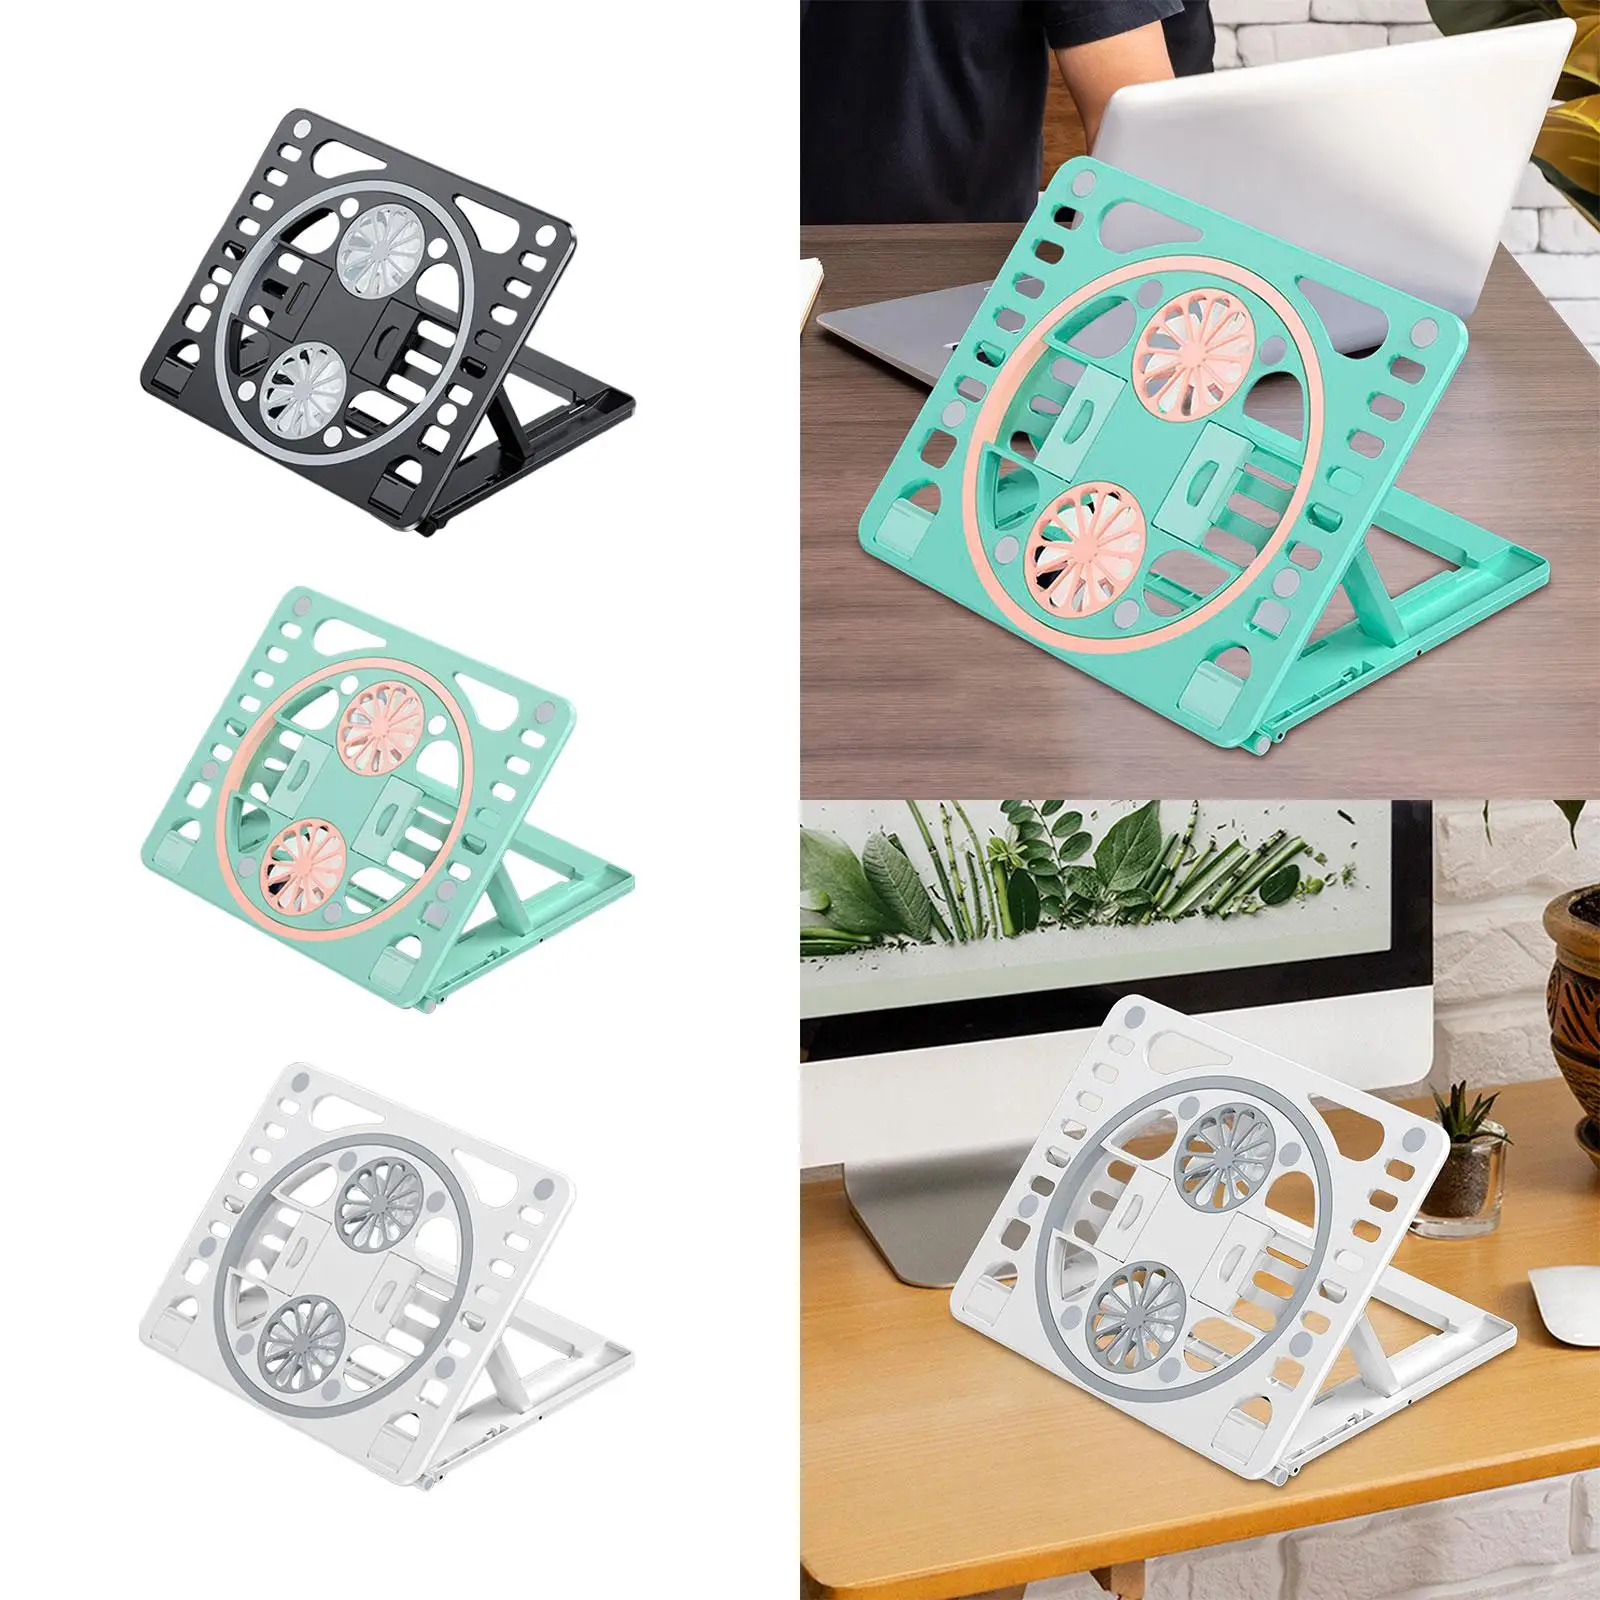 Laptop Cooling Pad USB Powered 6 Height Adjustment with 2 Quiet Fans Portable Laptop Cooling Fan Stand for Desk Office Home